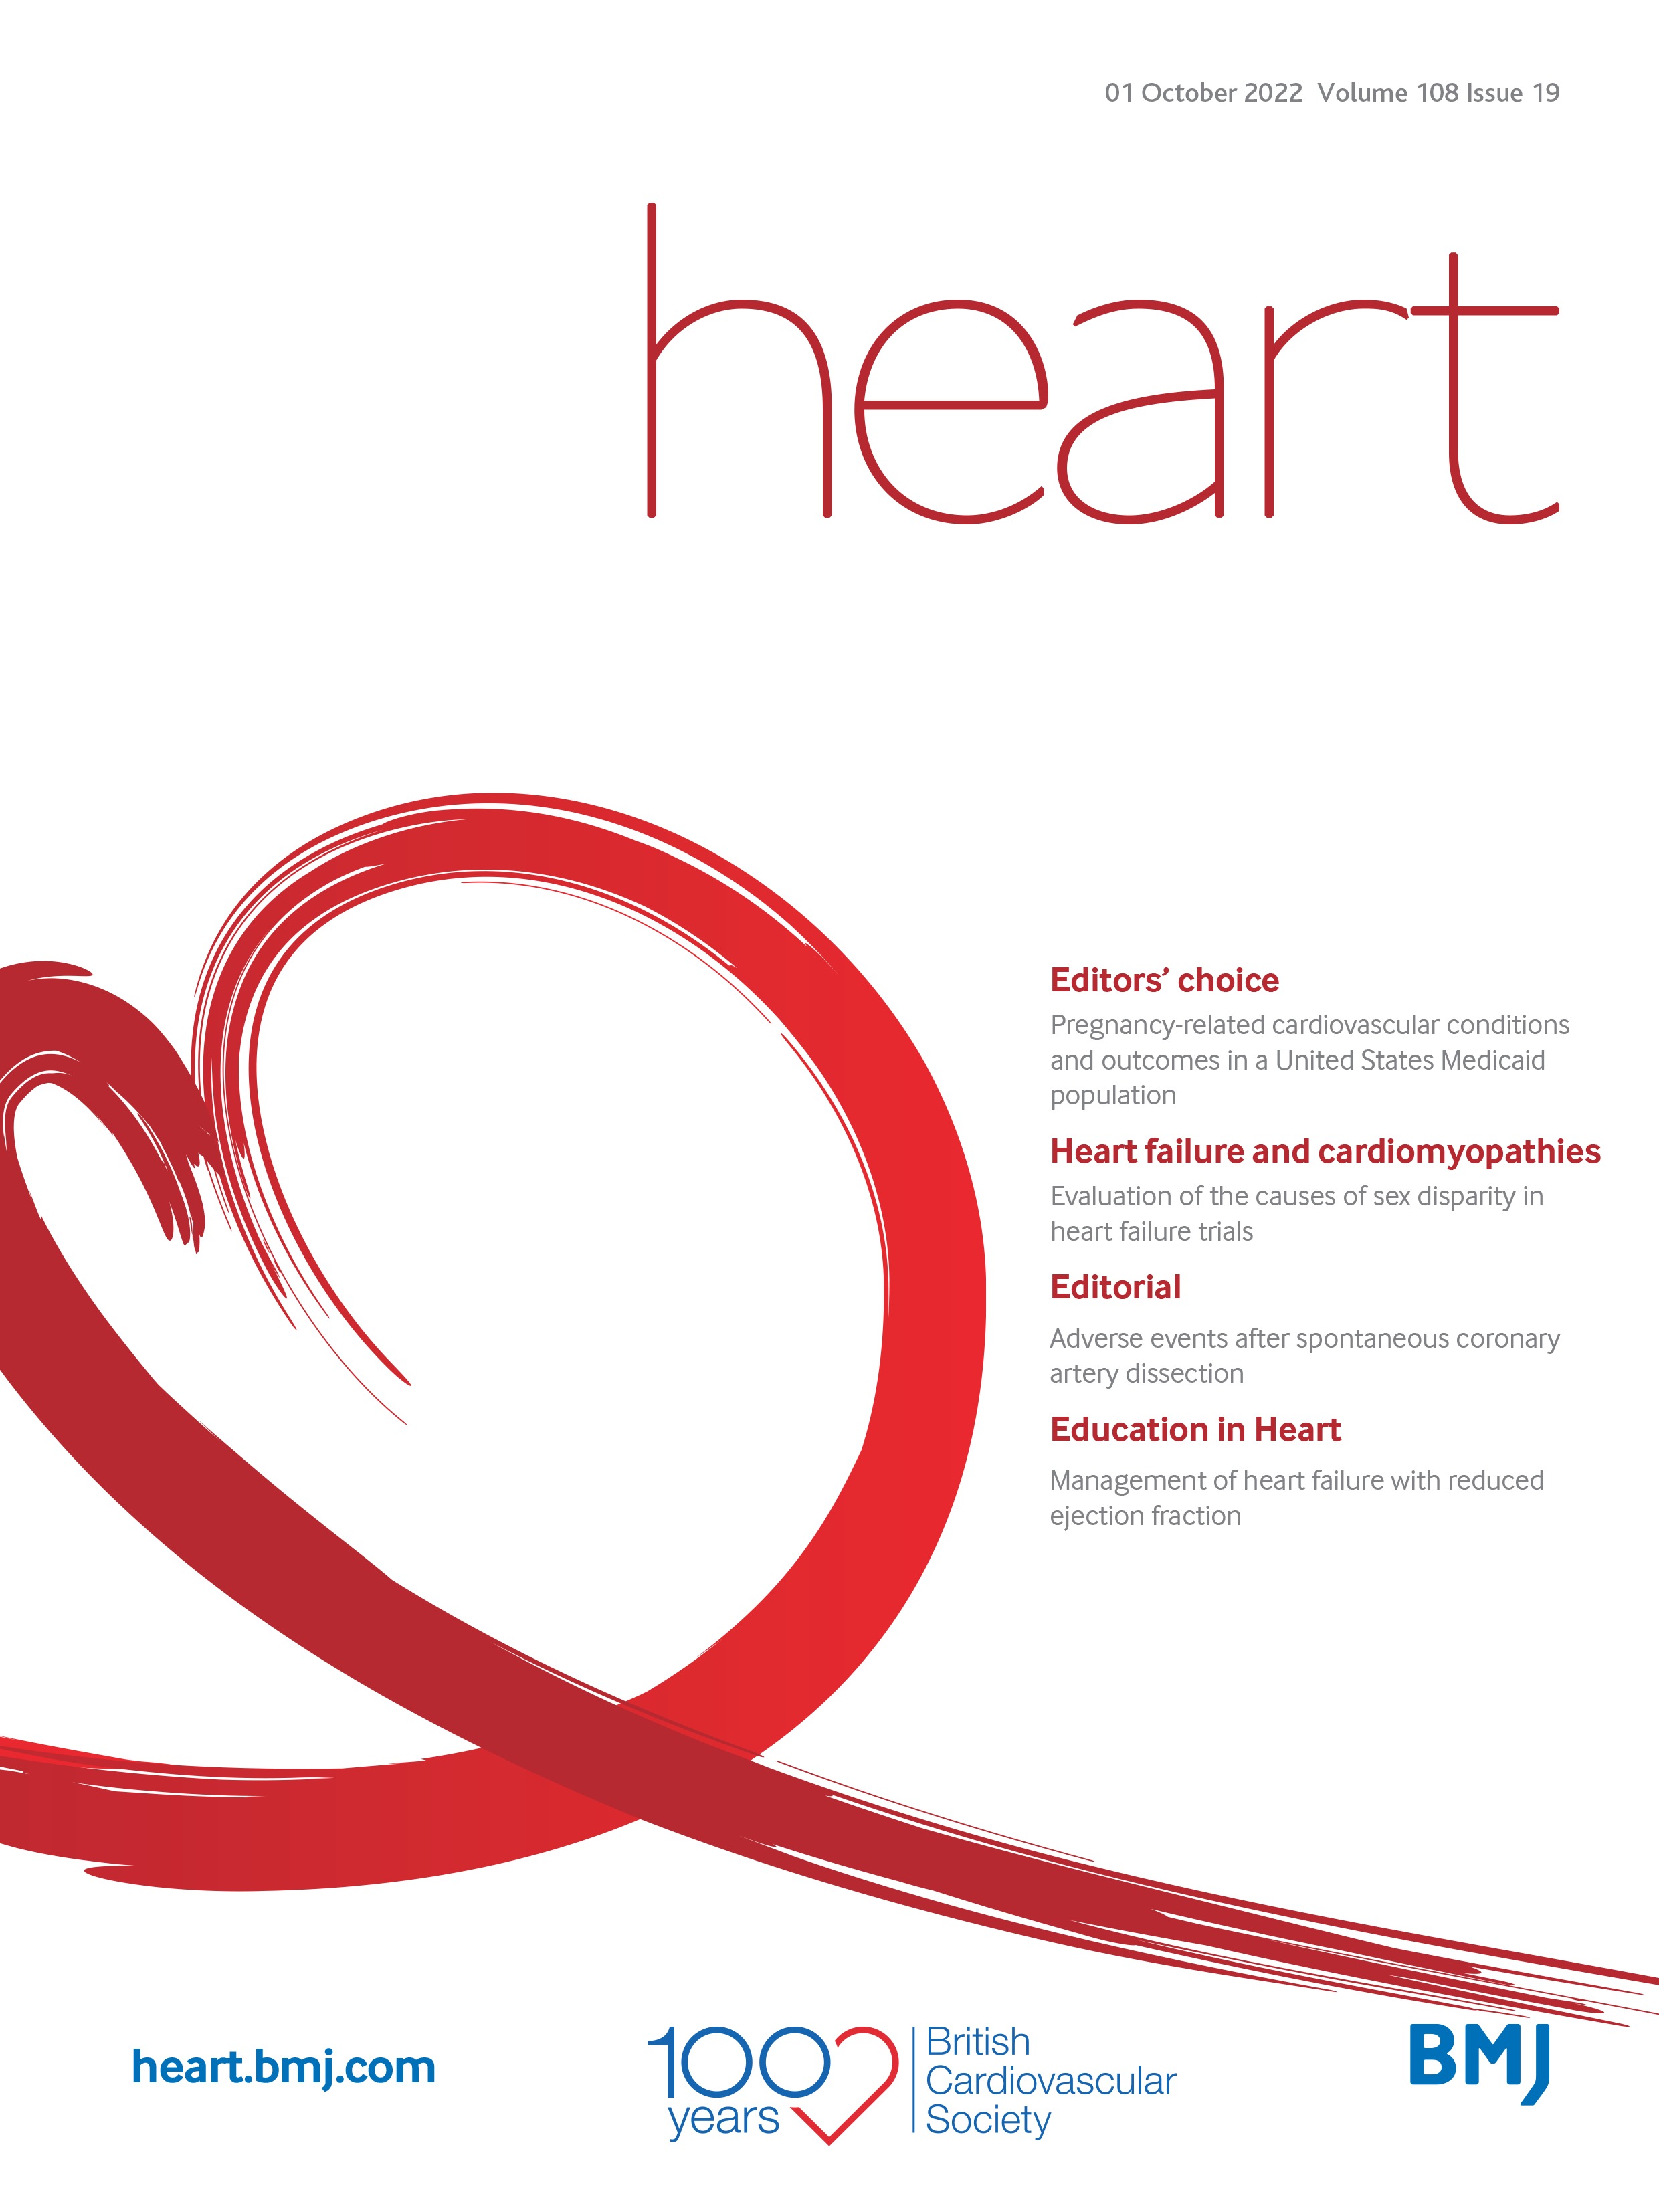 Pregnancy-related cardiovascular conditions and outcomes in a United States Medicaid population